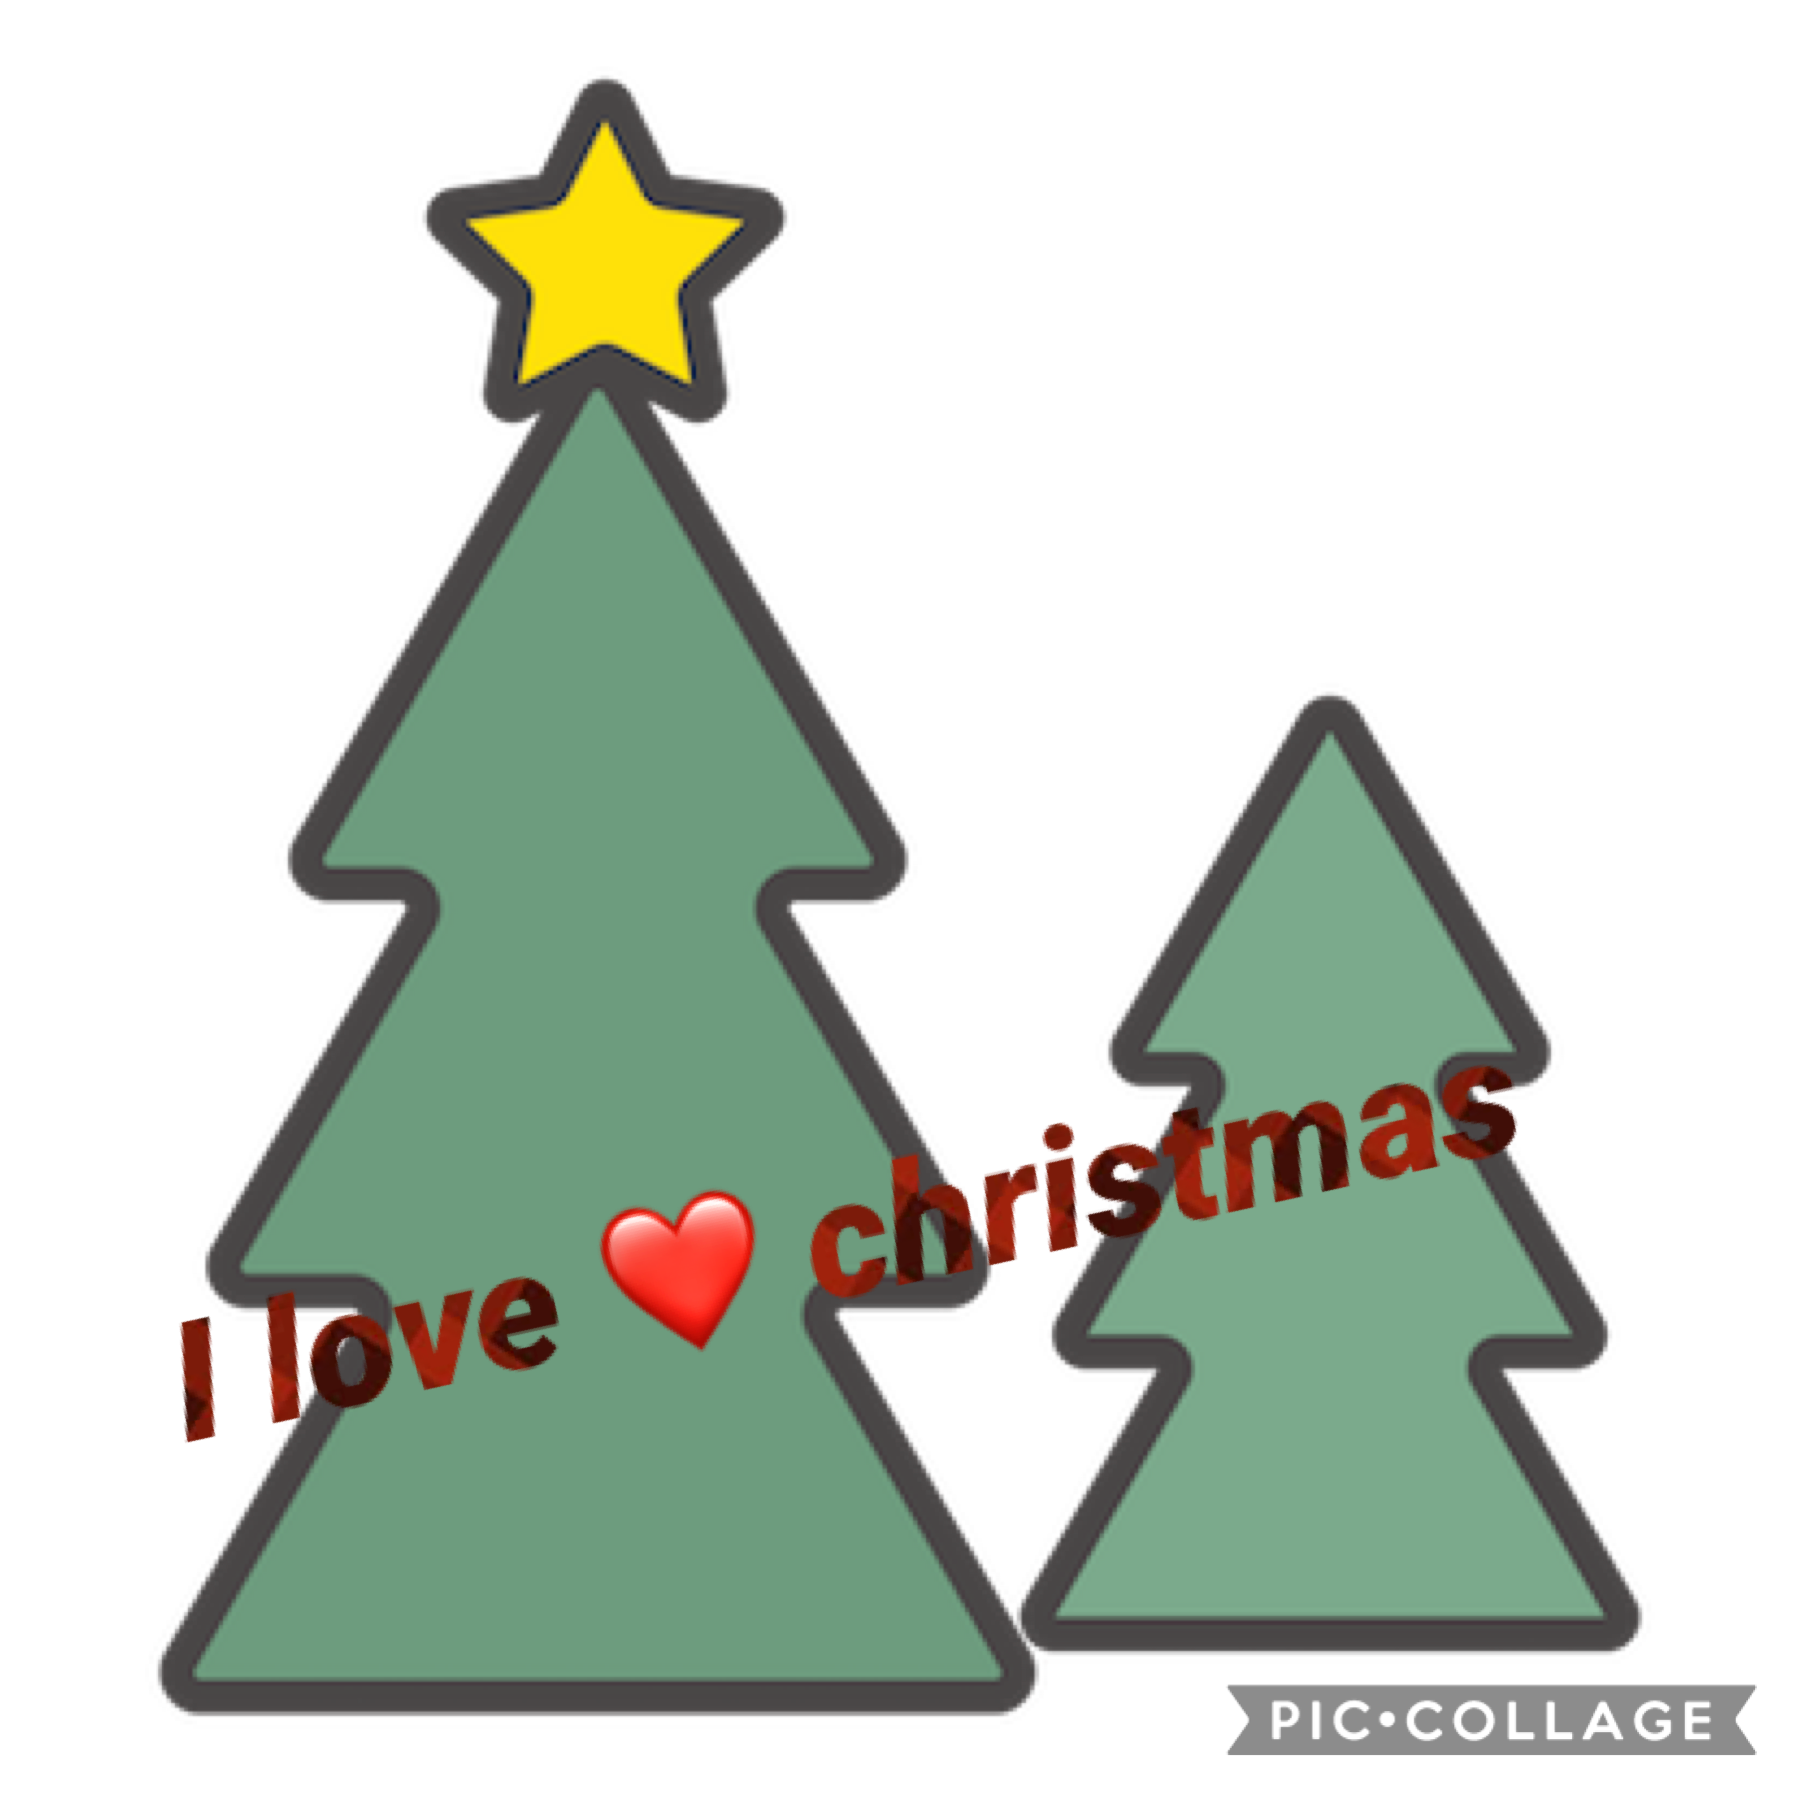 🎄❤️tap❤️🎄
I love y’all and I will keep giving shoutouts 